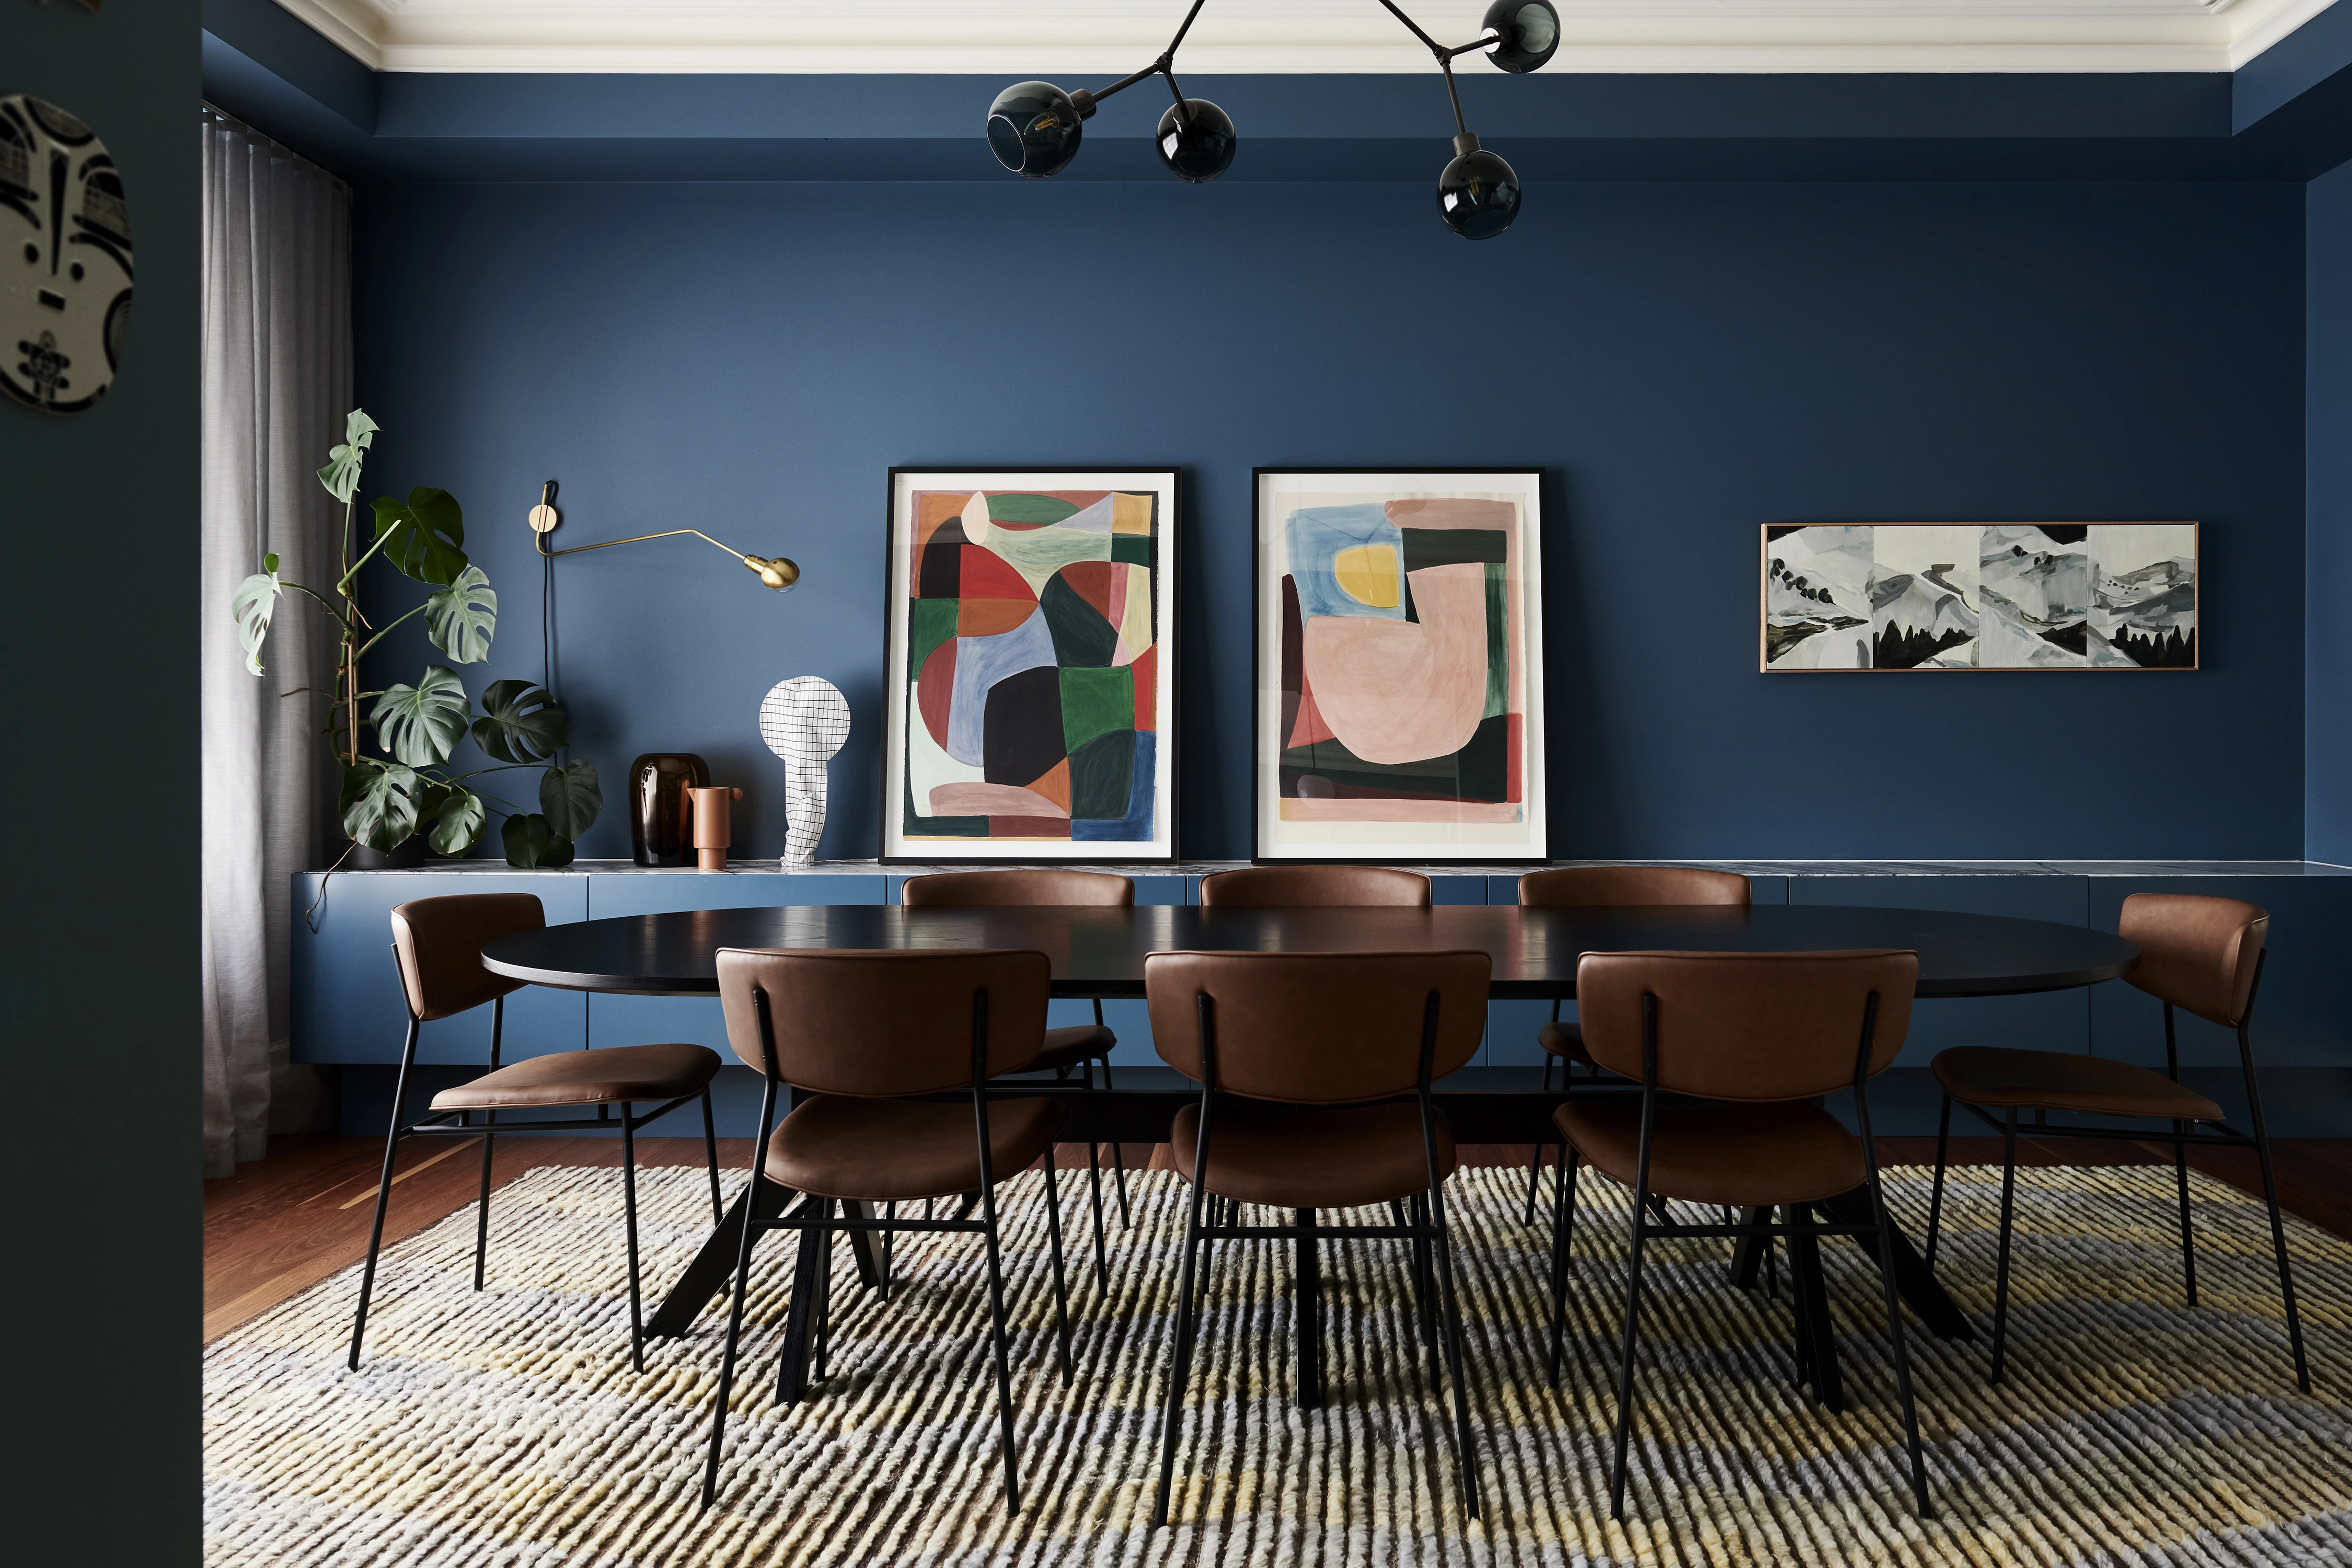 A Deep + Moody Dining Room 
Photos by Eve Wilson 
Dulux Eclipse Blue in dining room. (please note this project, photographed by us, was a finalist in the Dulux Colour awards 2021)
